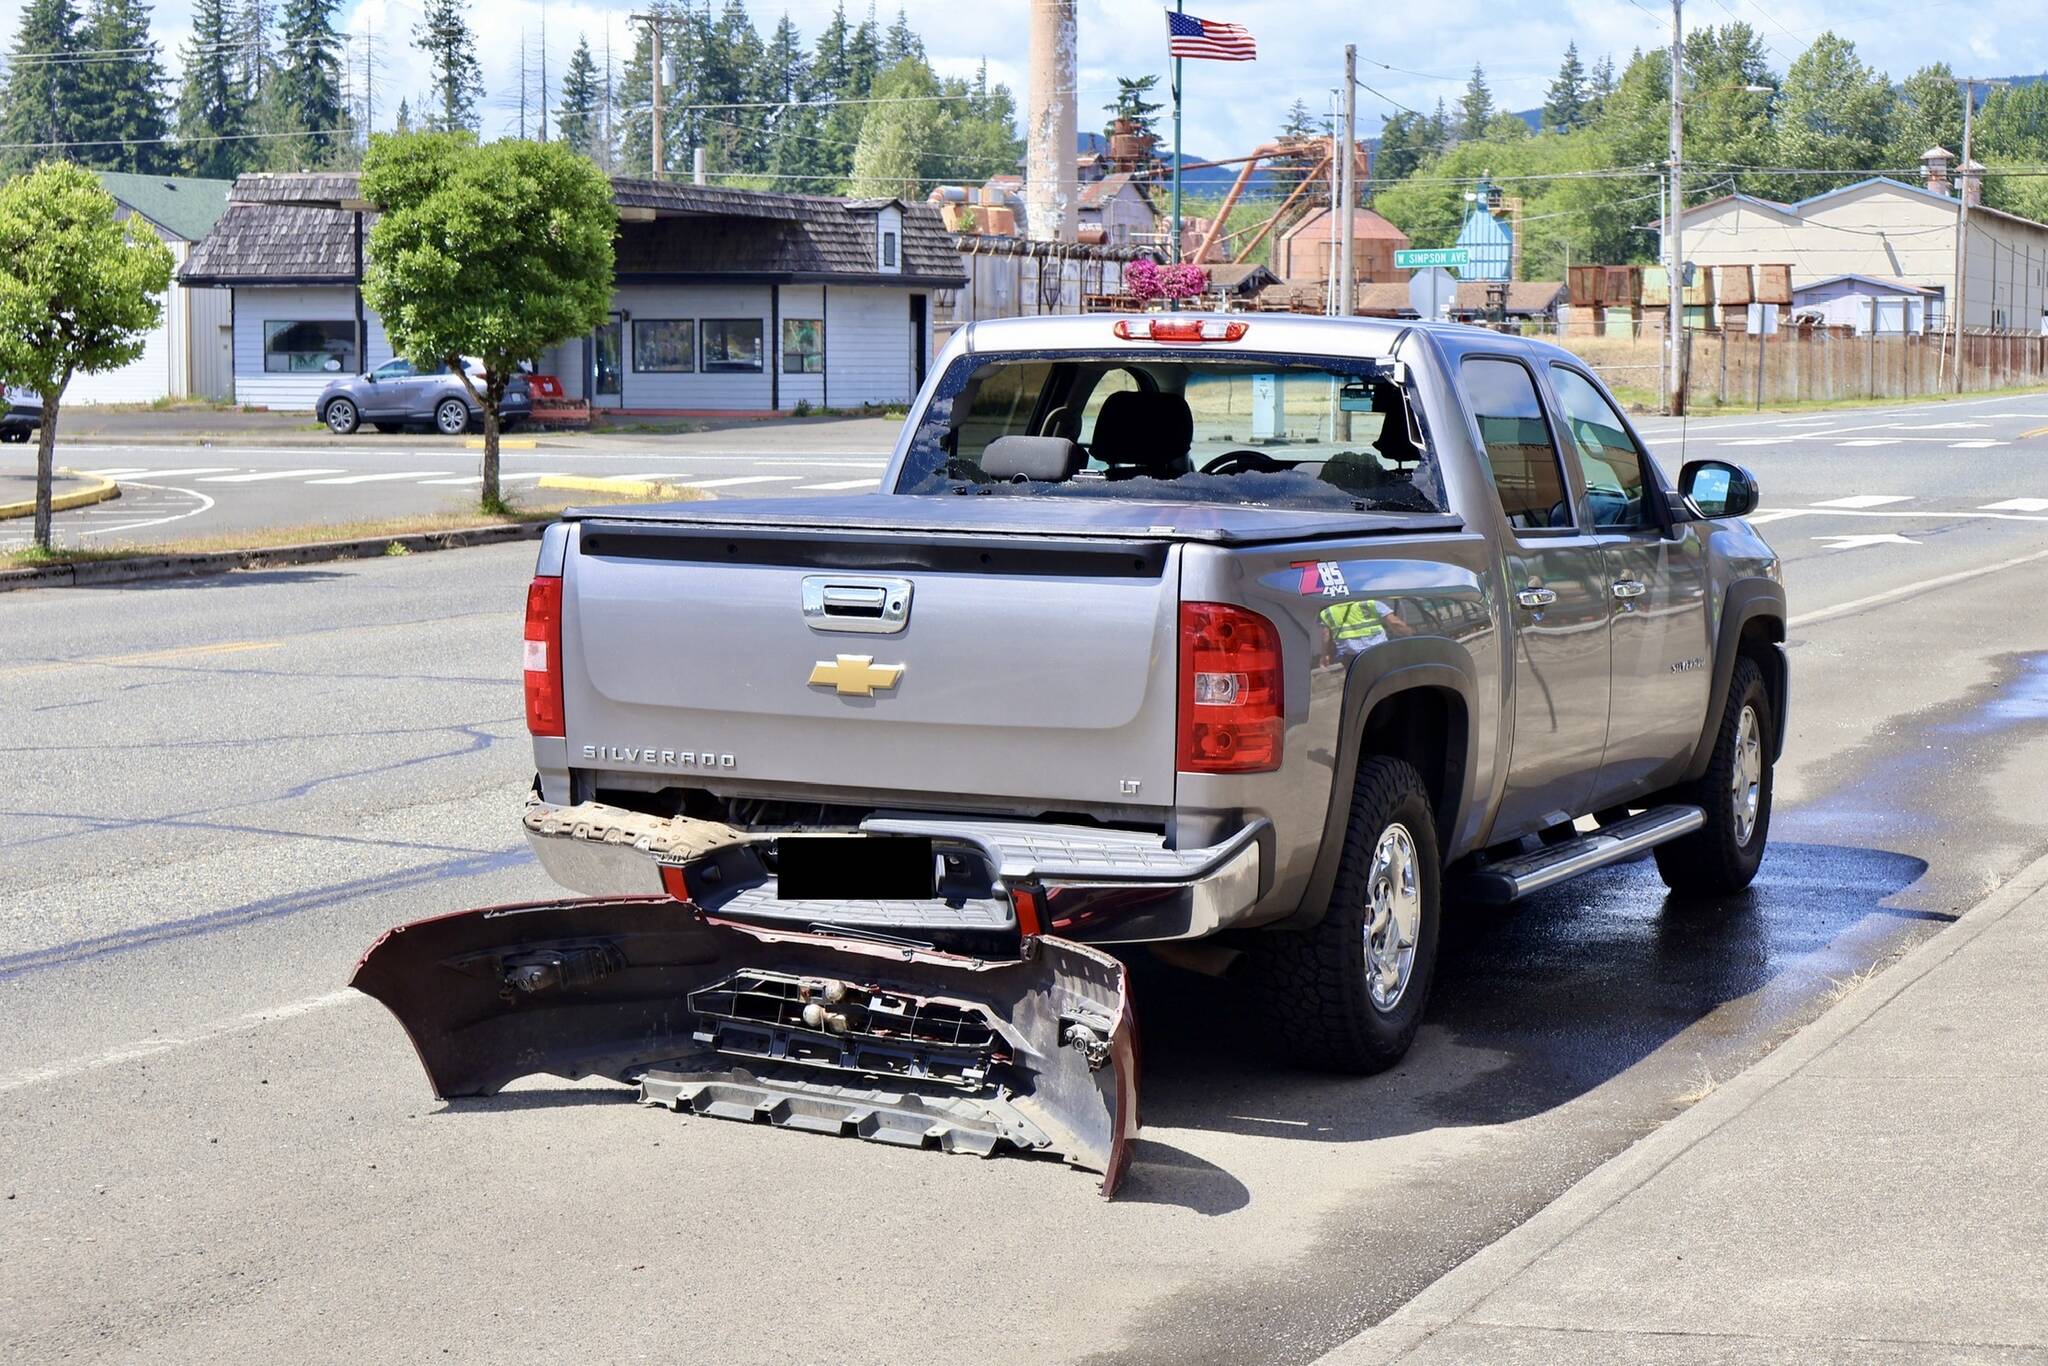 Damage is evident to a vehicle struck by gunfire in a road rage-related incident near McCleary, including the bumper of the suspect vehicle caught on the trailer hitch. (Michael S. Lockett / The Daily World)